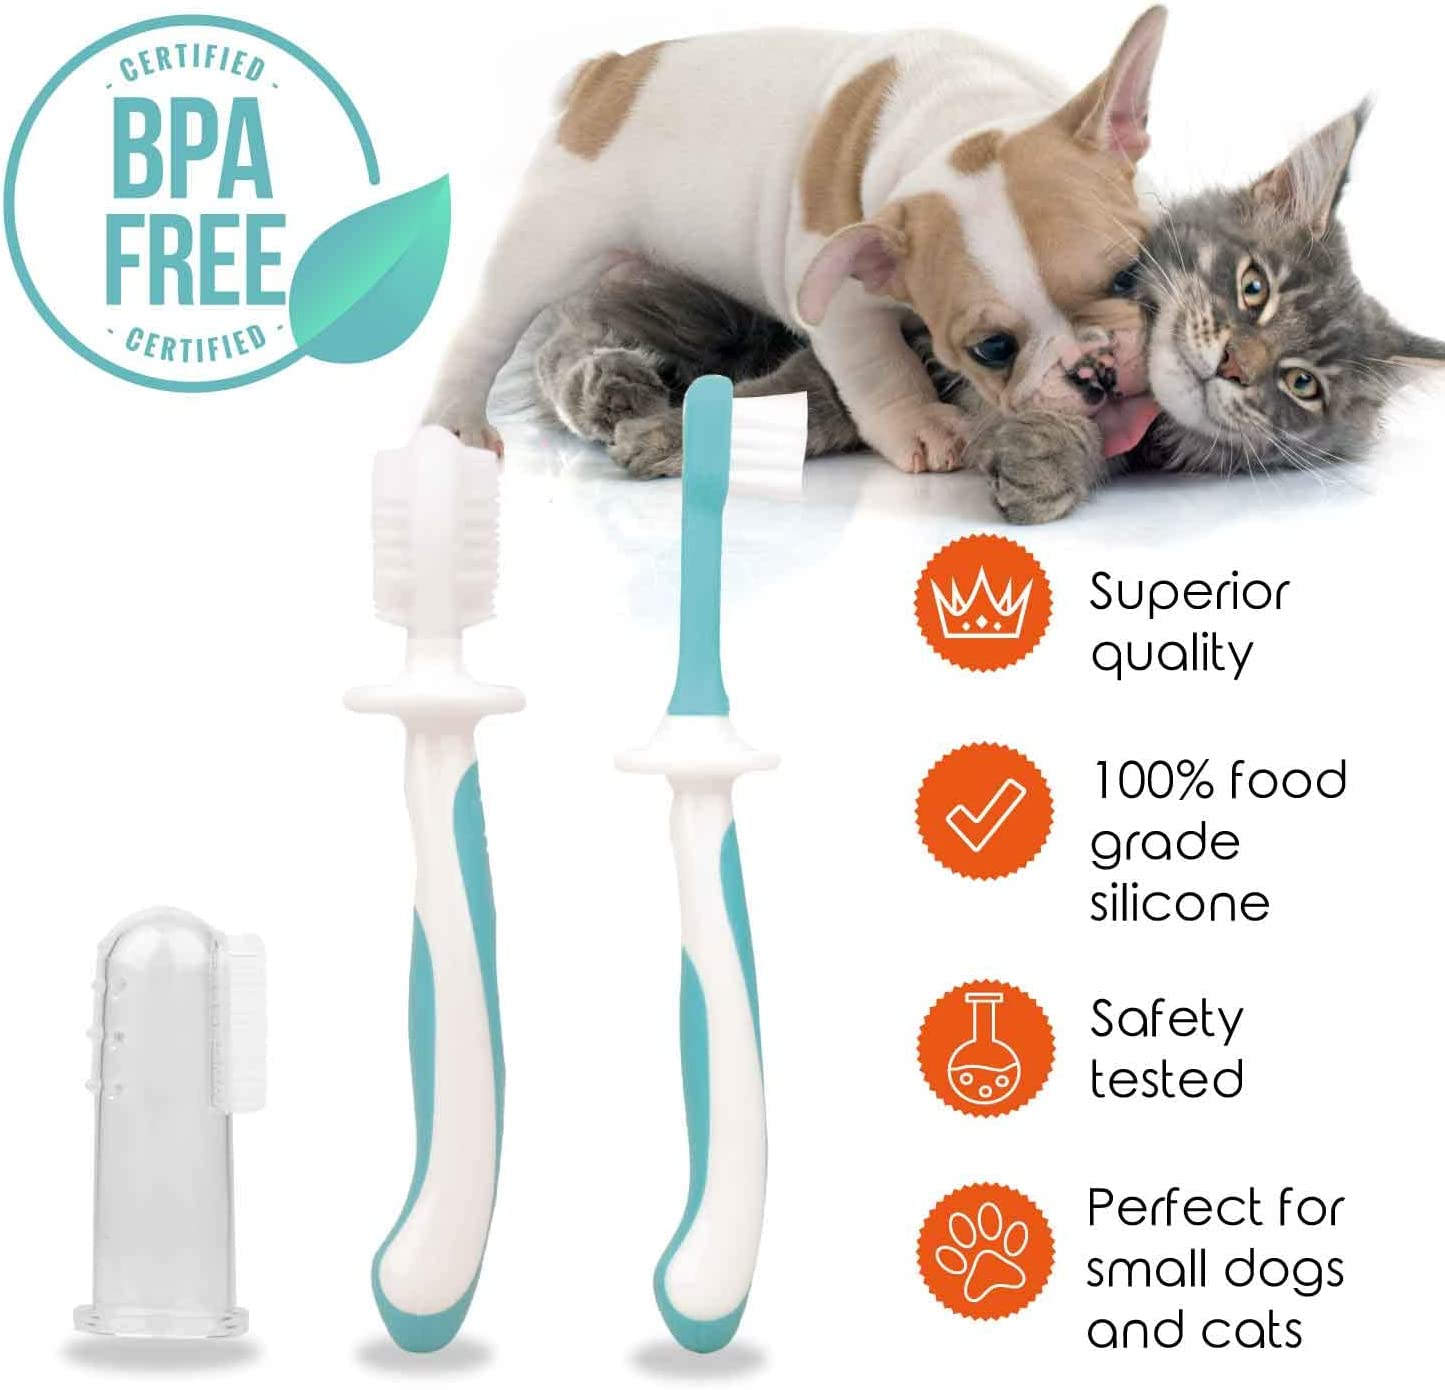 3 Piece Dog Toothbrush Kit - Dog Finger Toothbrush, Double-Sided Toothbrush, and Small Doggie Toothbrush - Freshen Breath & Remove Plaque Build-Up with This Cat Toothbrush and Puppy Toothbrush Set